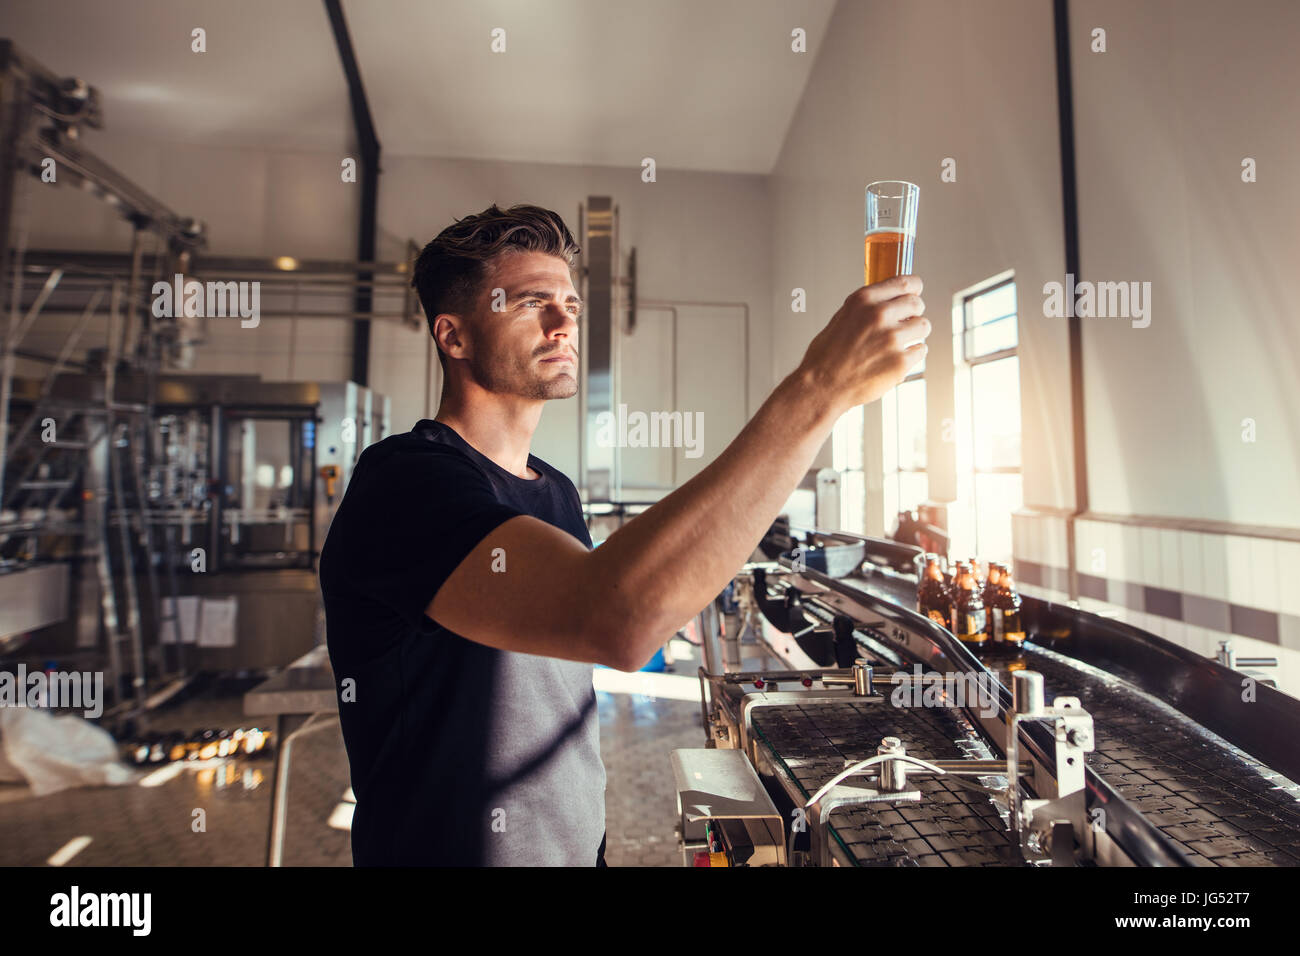 Young man examining the quality of craft beer at brewery. Male inspector working at alcohol manufacturing factory checking the beer. Stock Photo